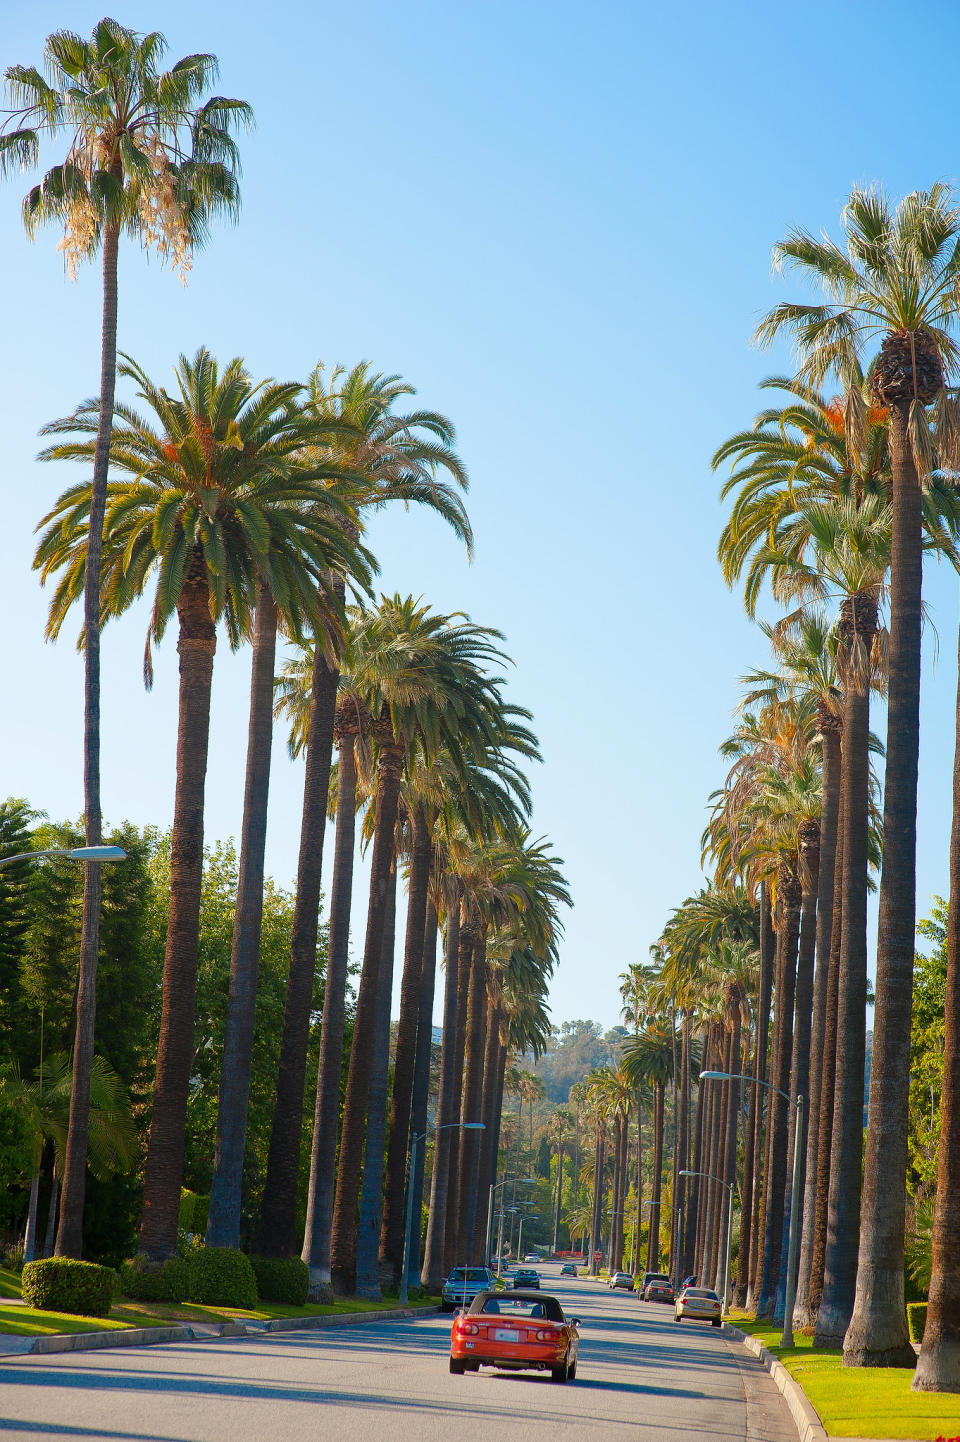 Hire a car and drive down the iconic palm tree-lined streets. Photo: Supplied